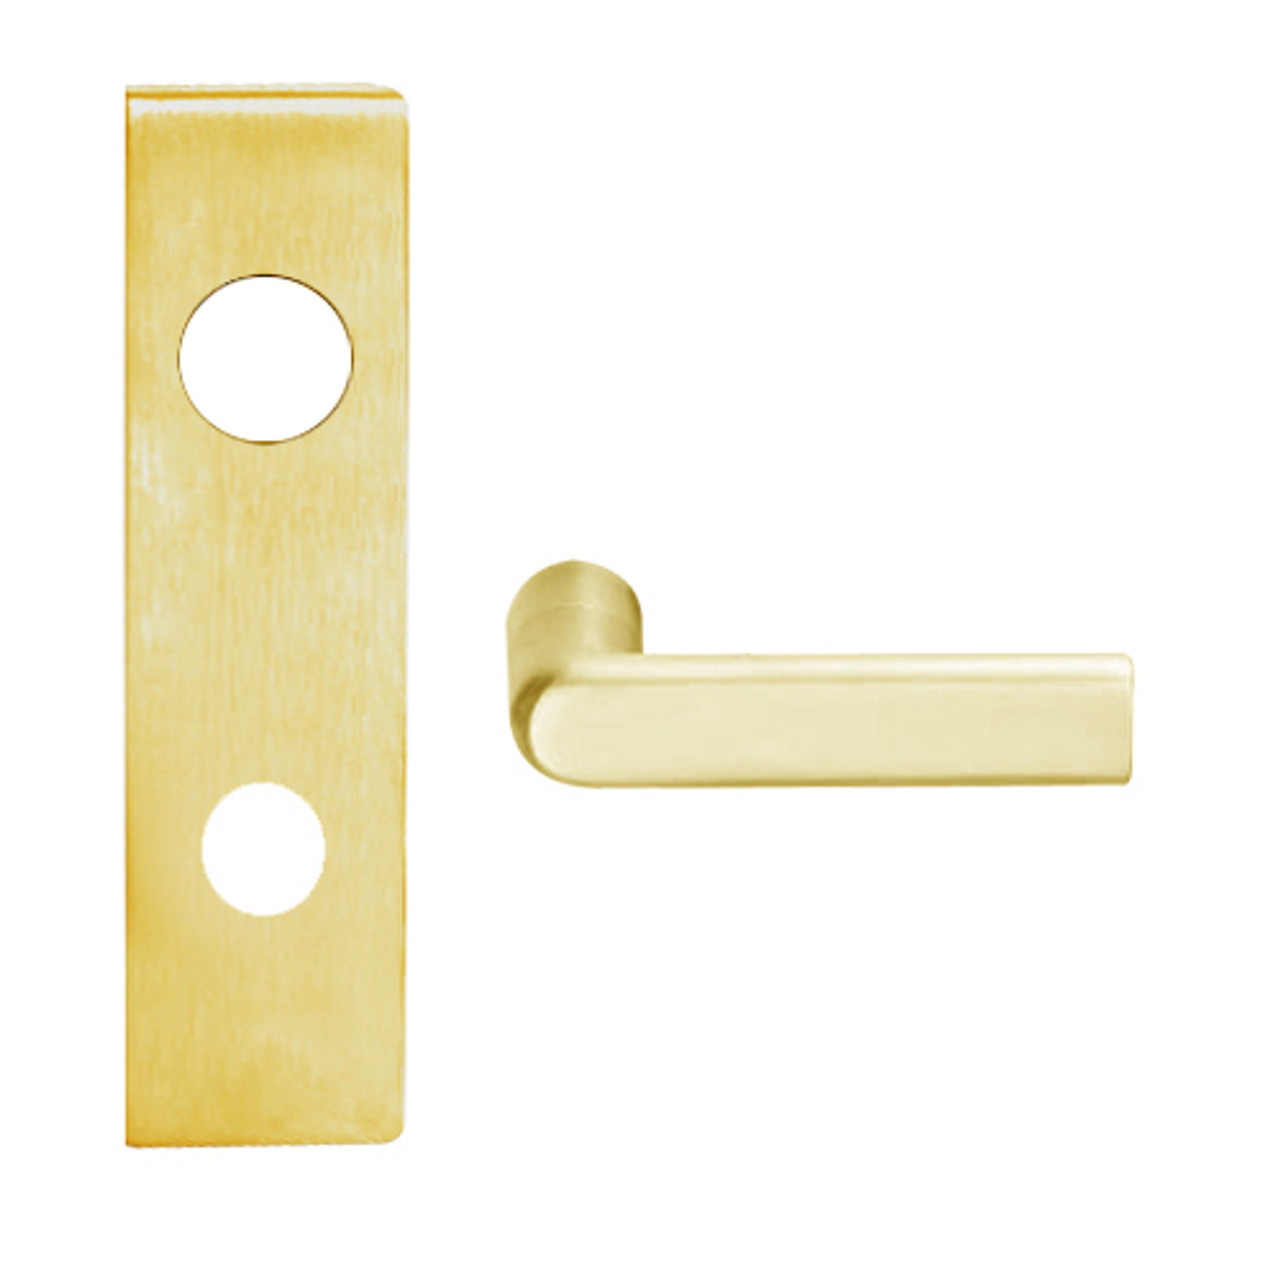 L9026R-01N-605 Schlage L Series Exit Lock with Cylinder Commercial Mortise Lock with 01 Cast Lever Design and Full Size Core in Bright Brass